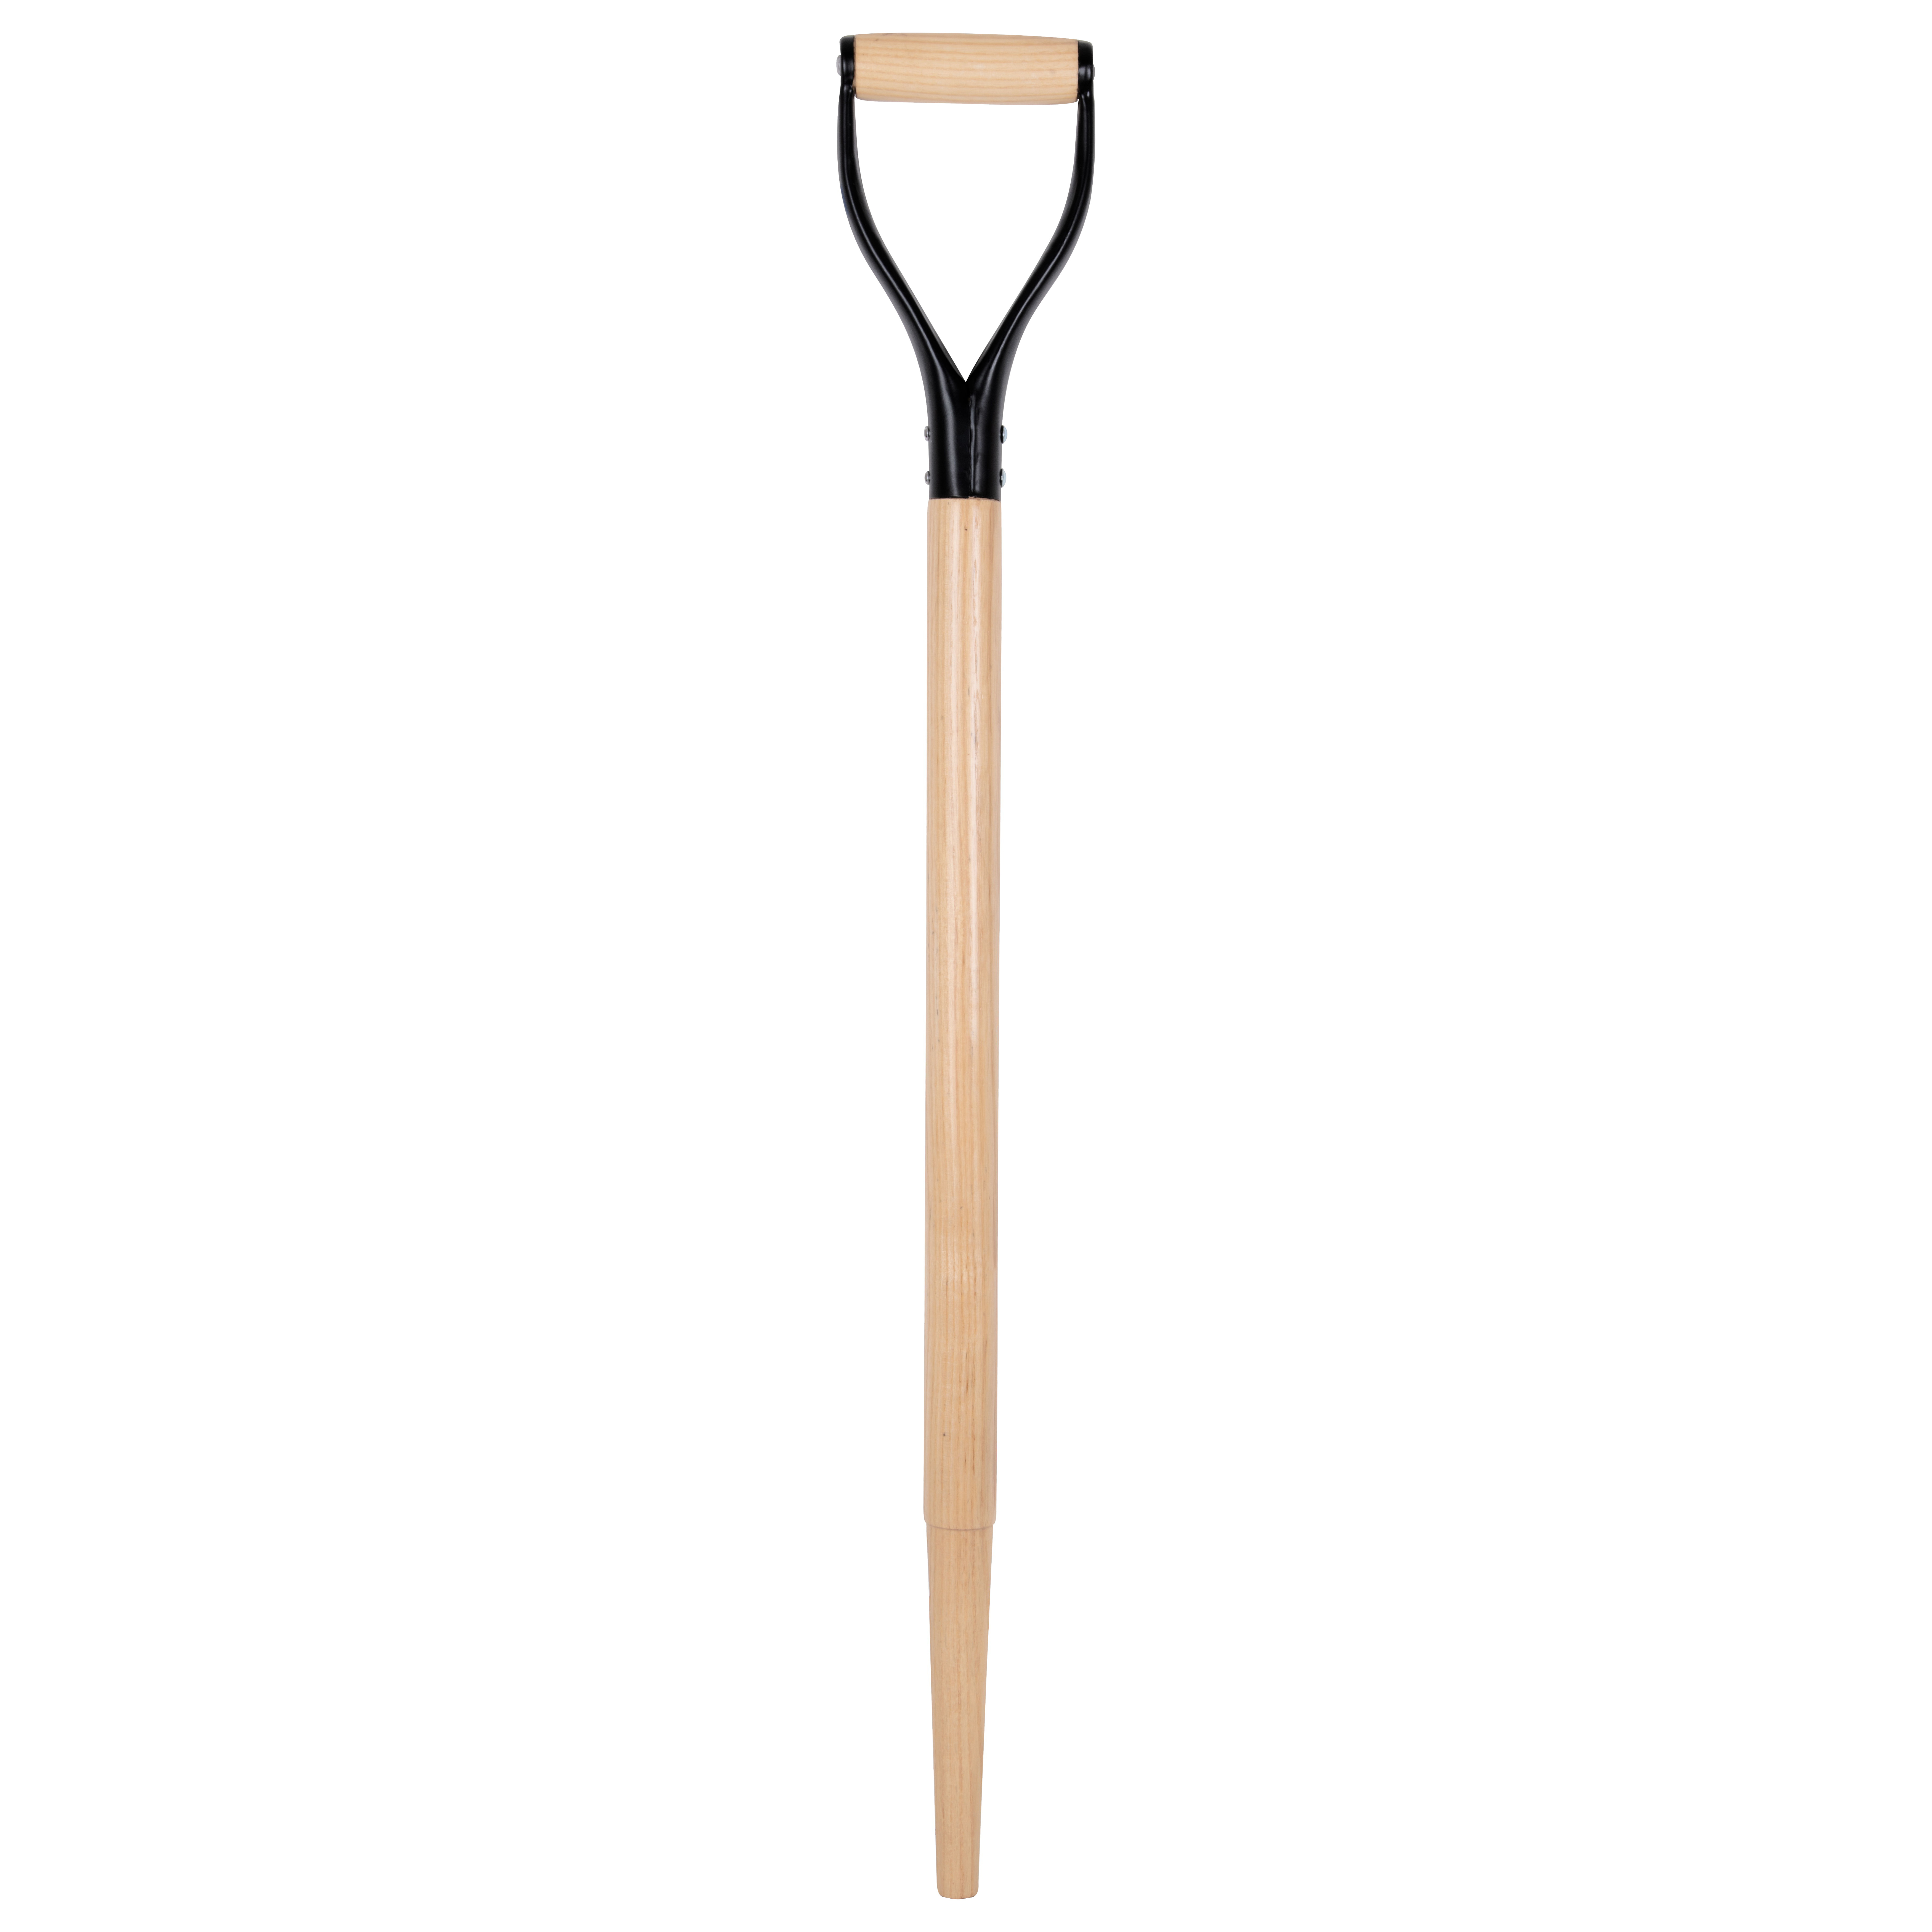 MG-PY-E-30 Shovel Handle, Wood, For: Replacement